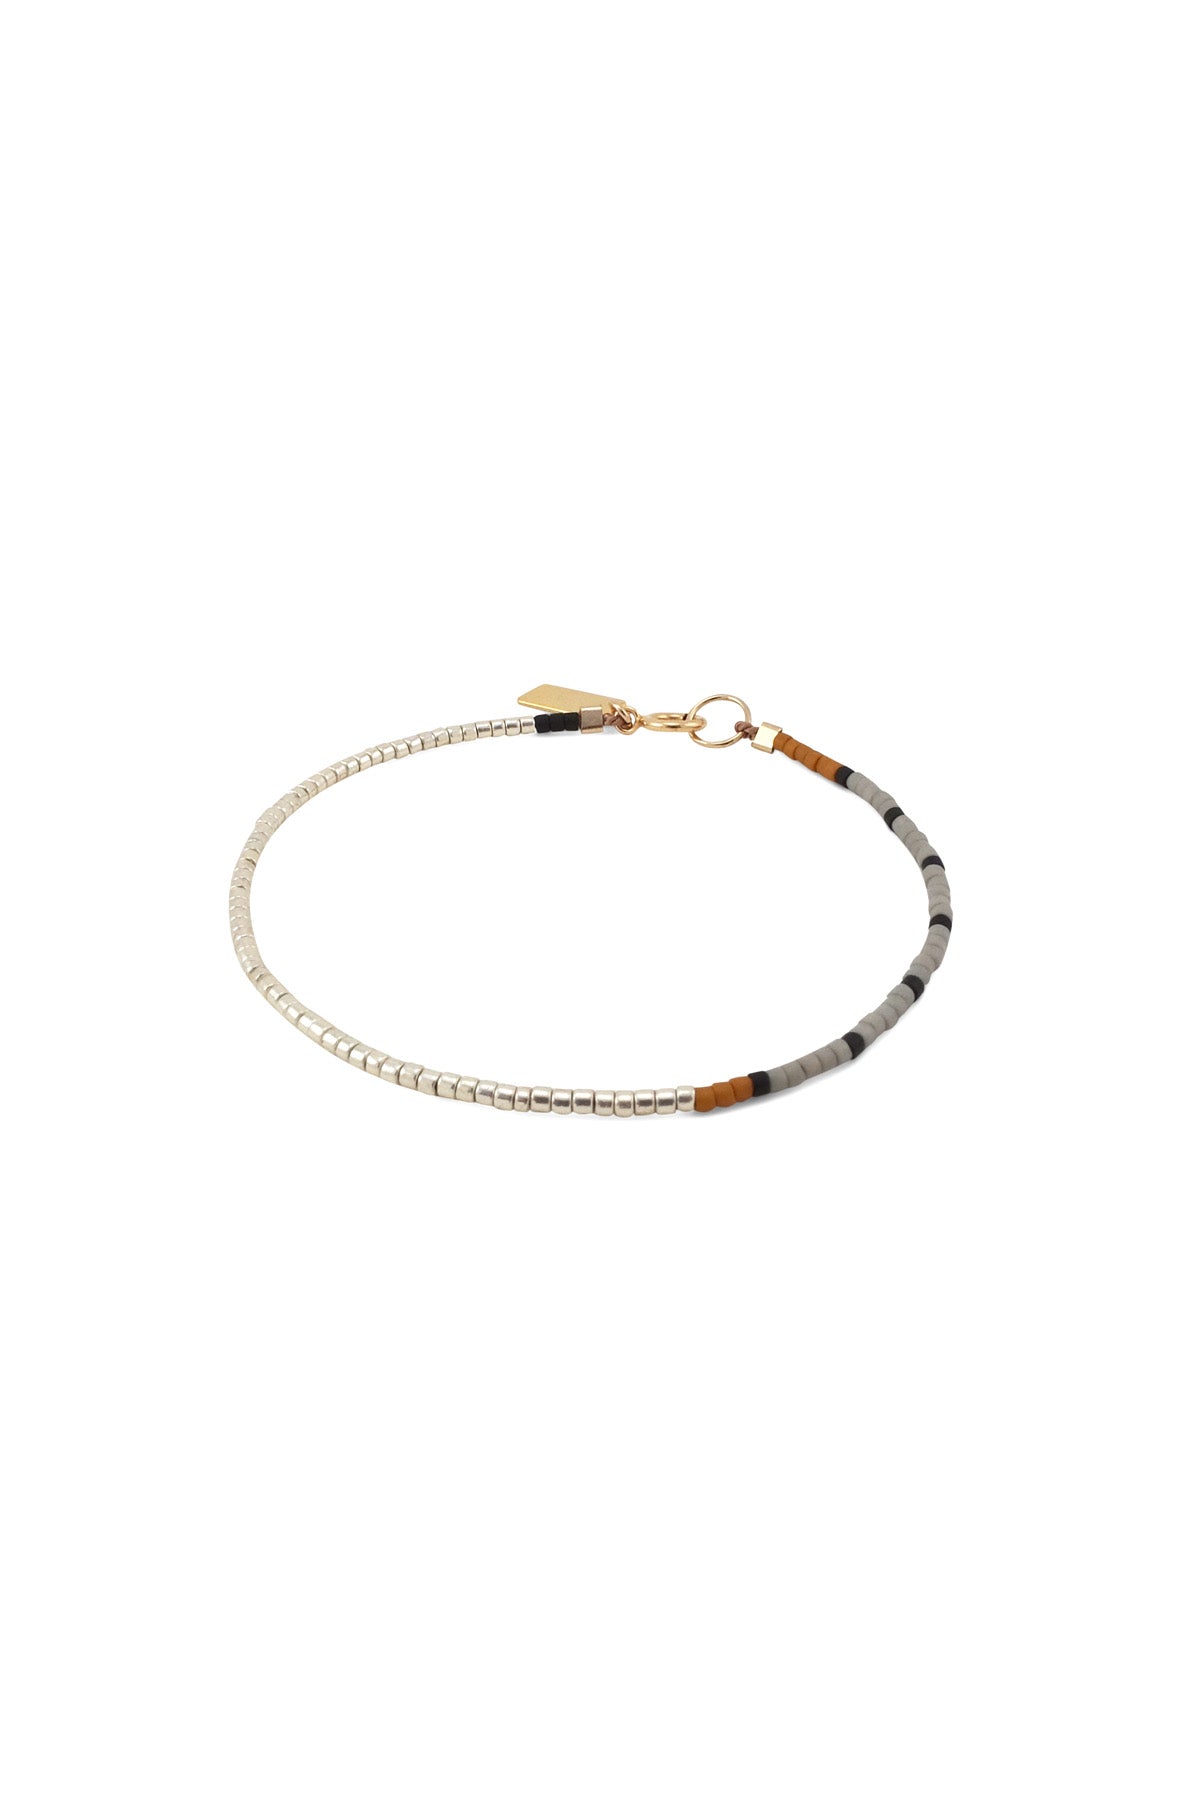 The Nootka Bracelet has an asymmetrical design featuring a long gold beaded segment and a sequence of black beads among a stretch of palette colors.